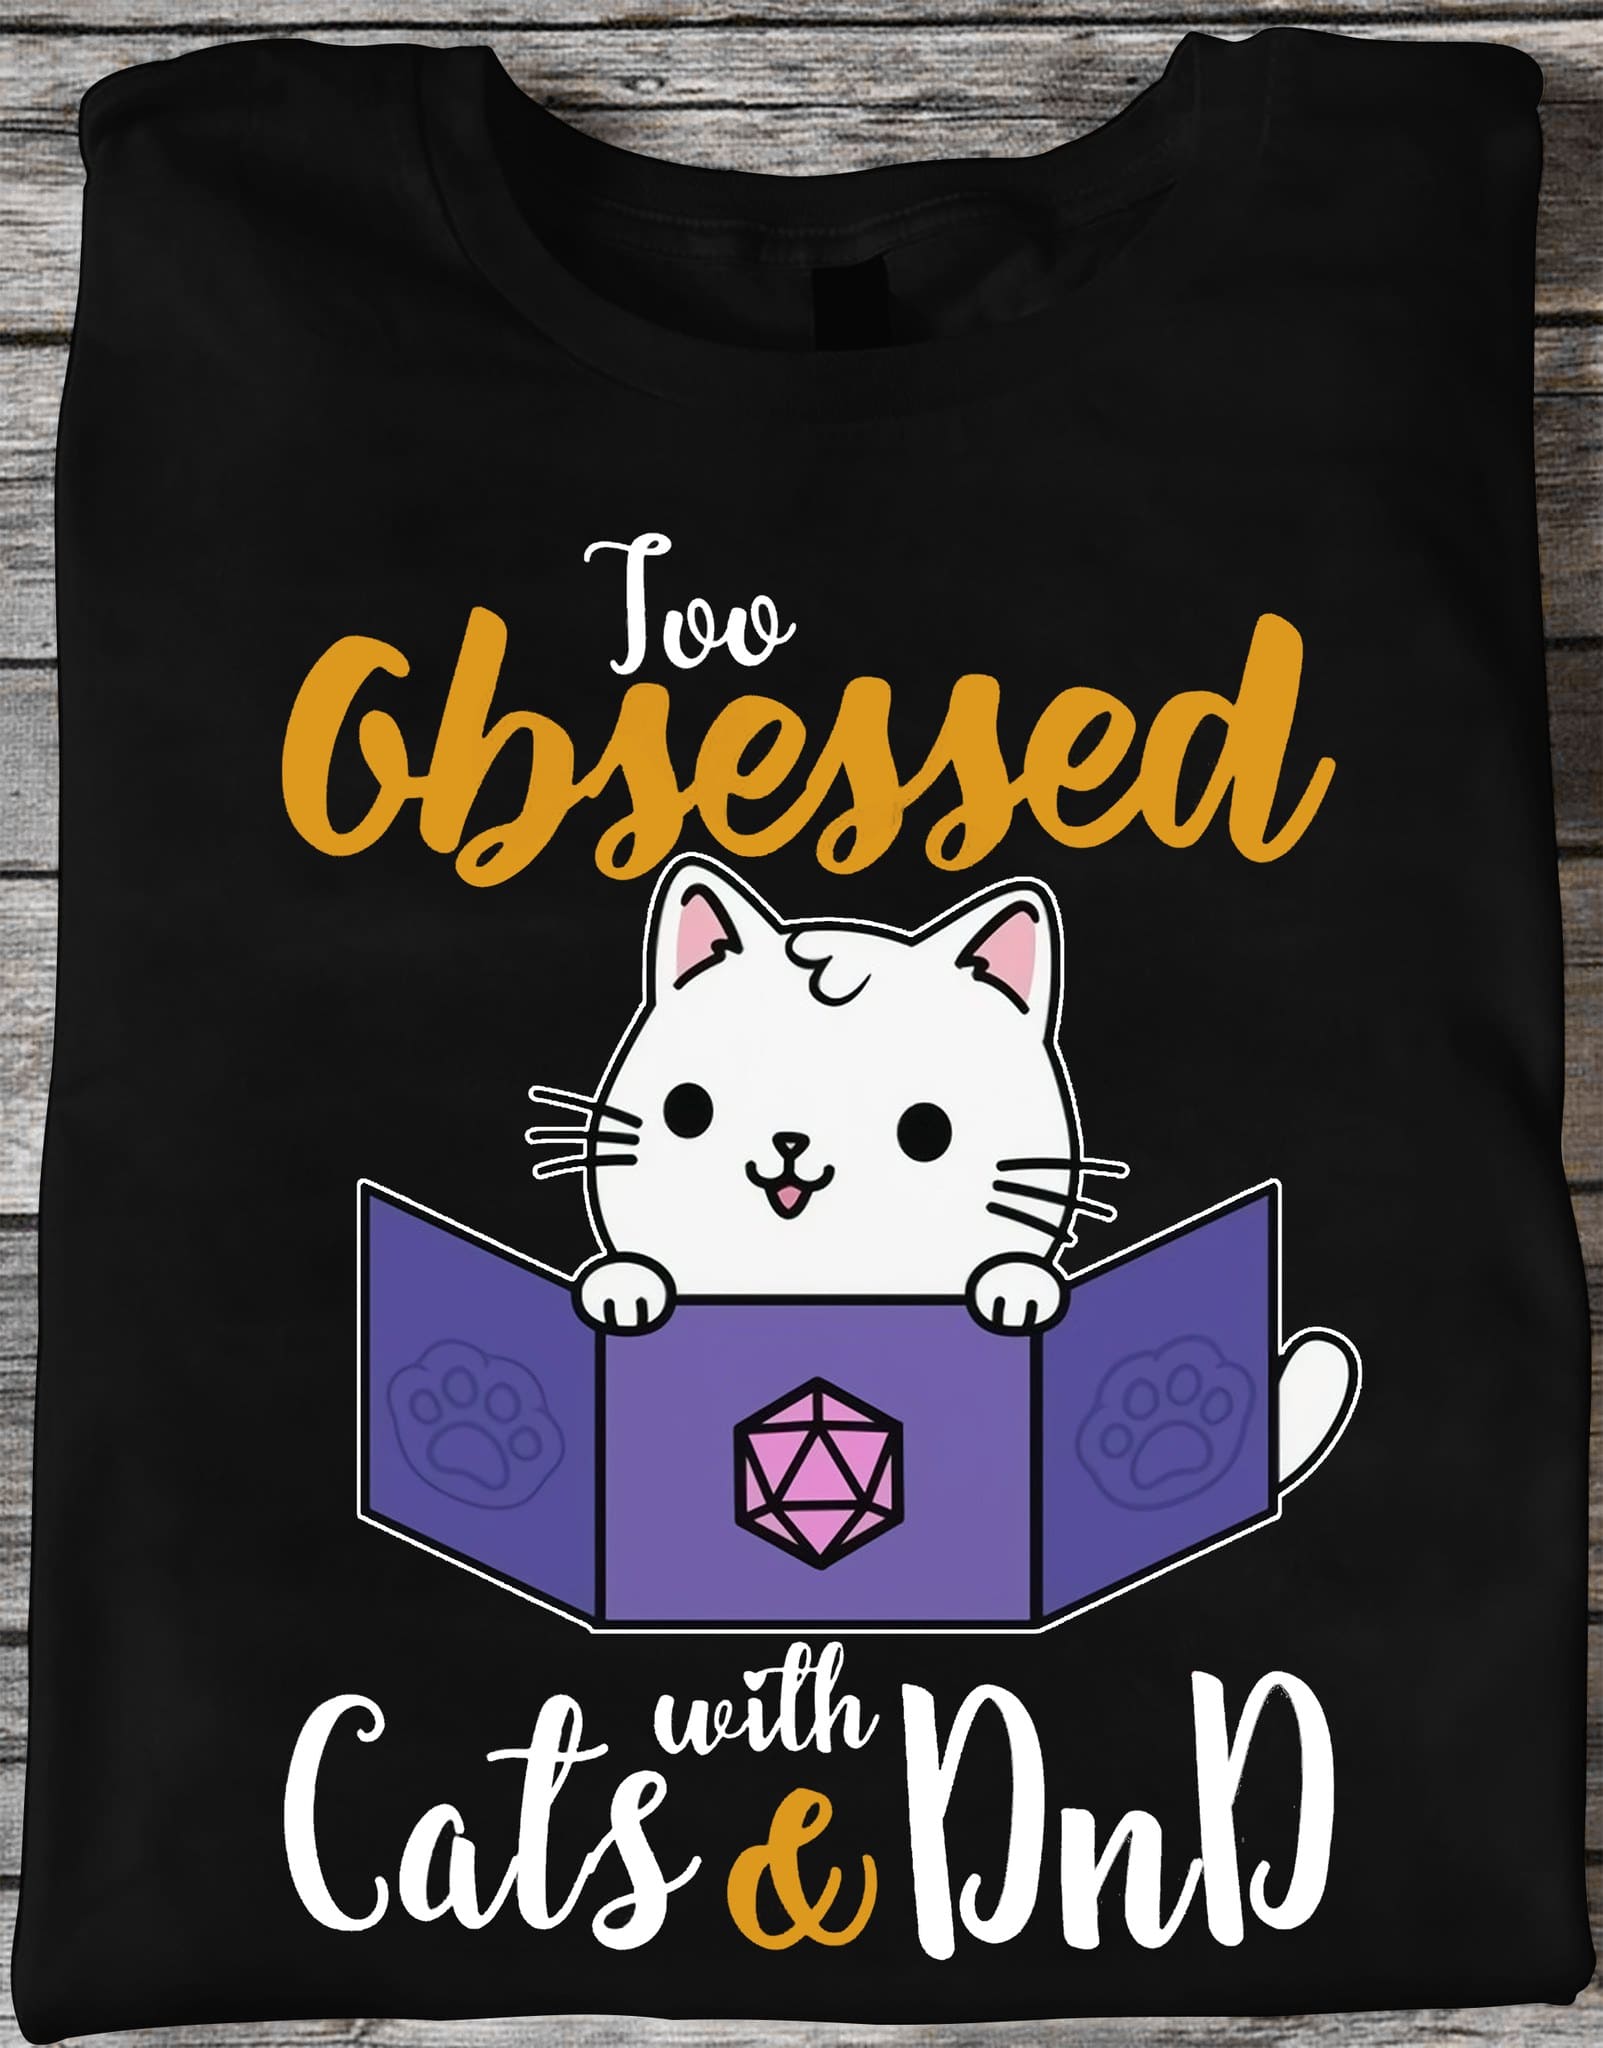 Too obsessed with cats and DnD - Dungeons and Dragons, kitty cat and dices